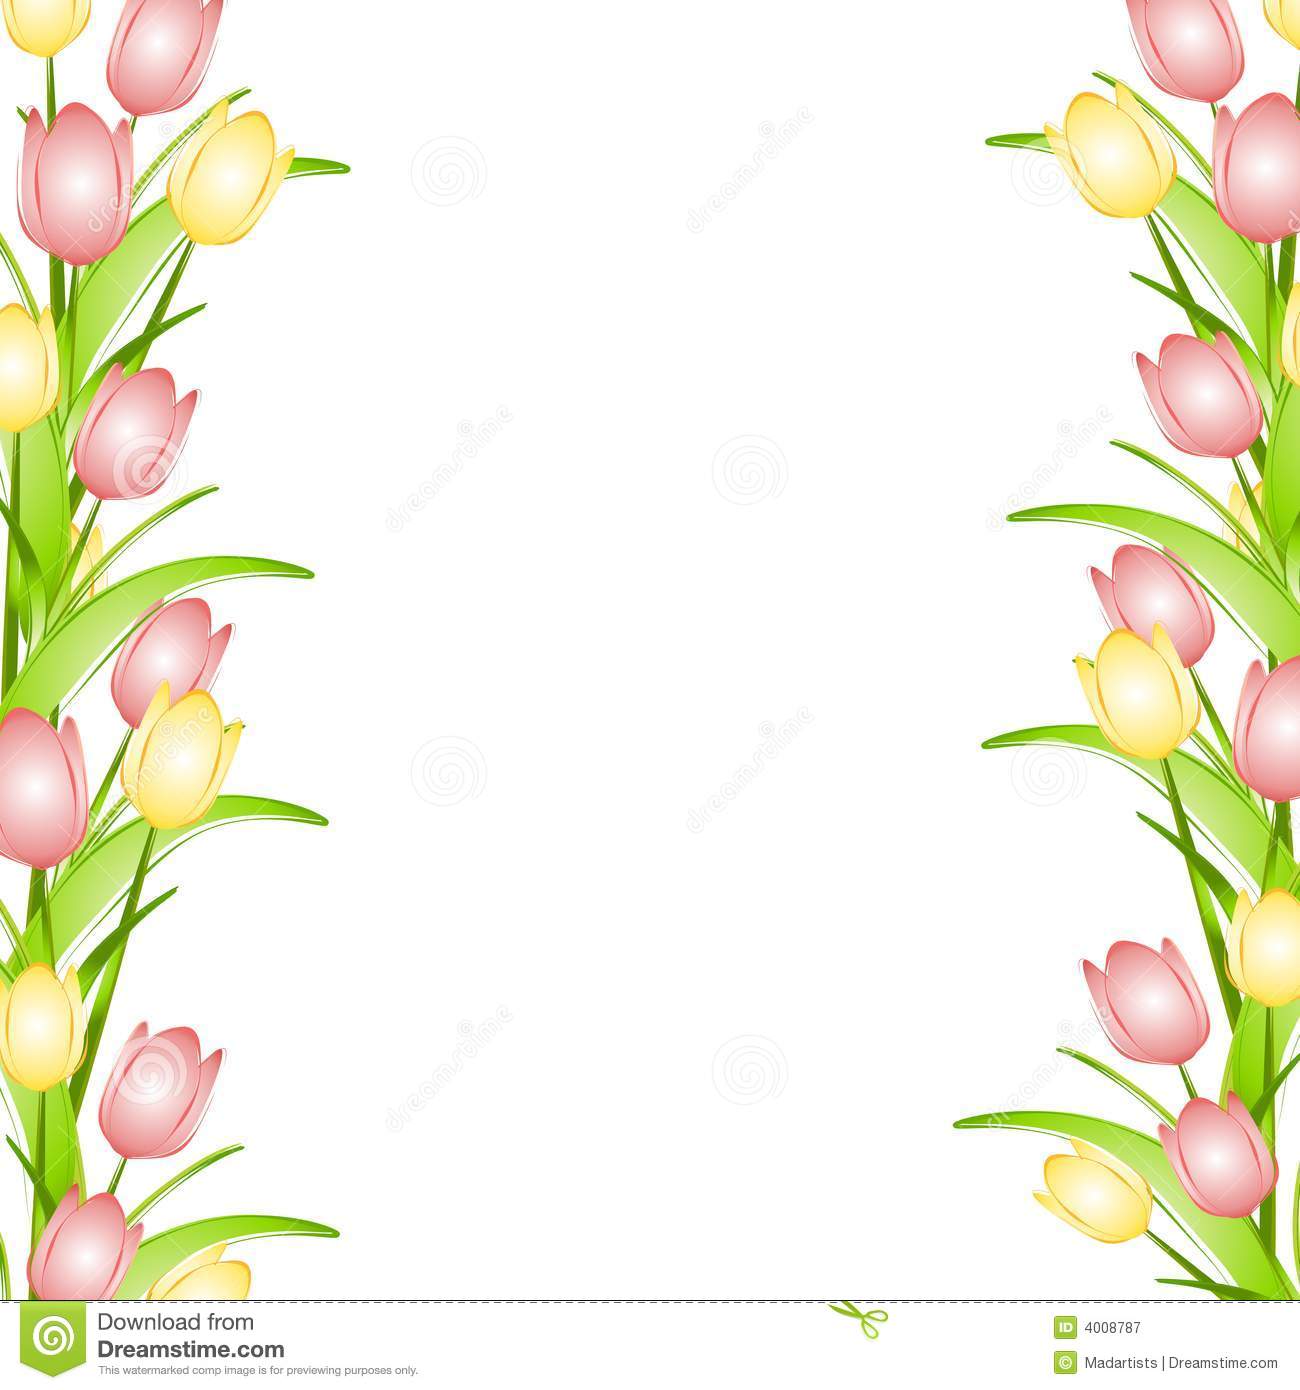 Printable Spring Border Search For Items Or Shops.